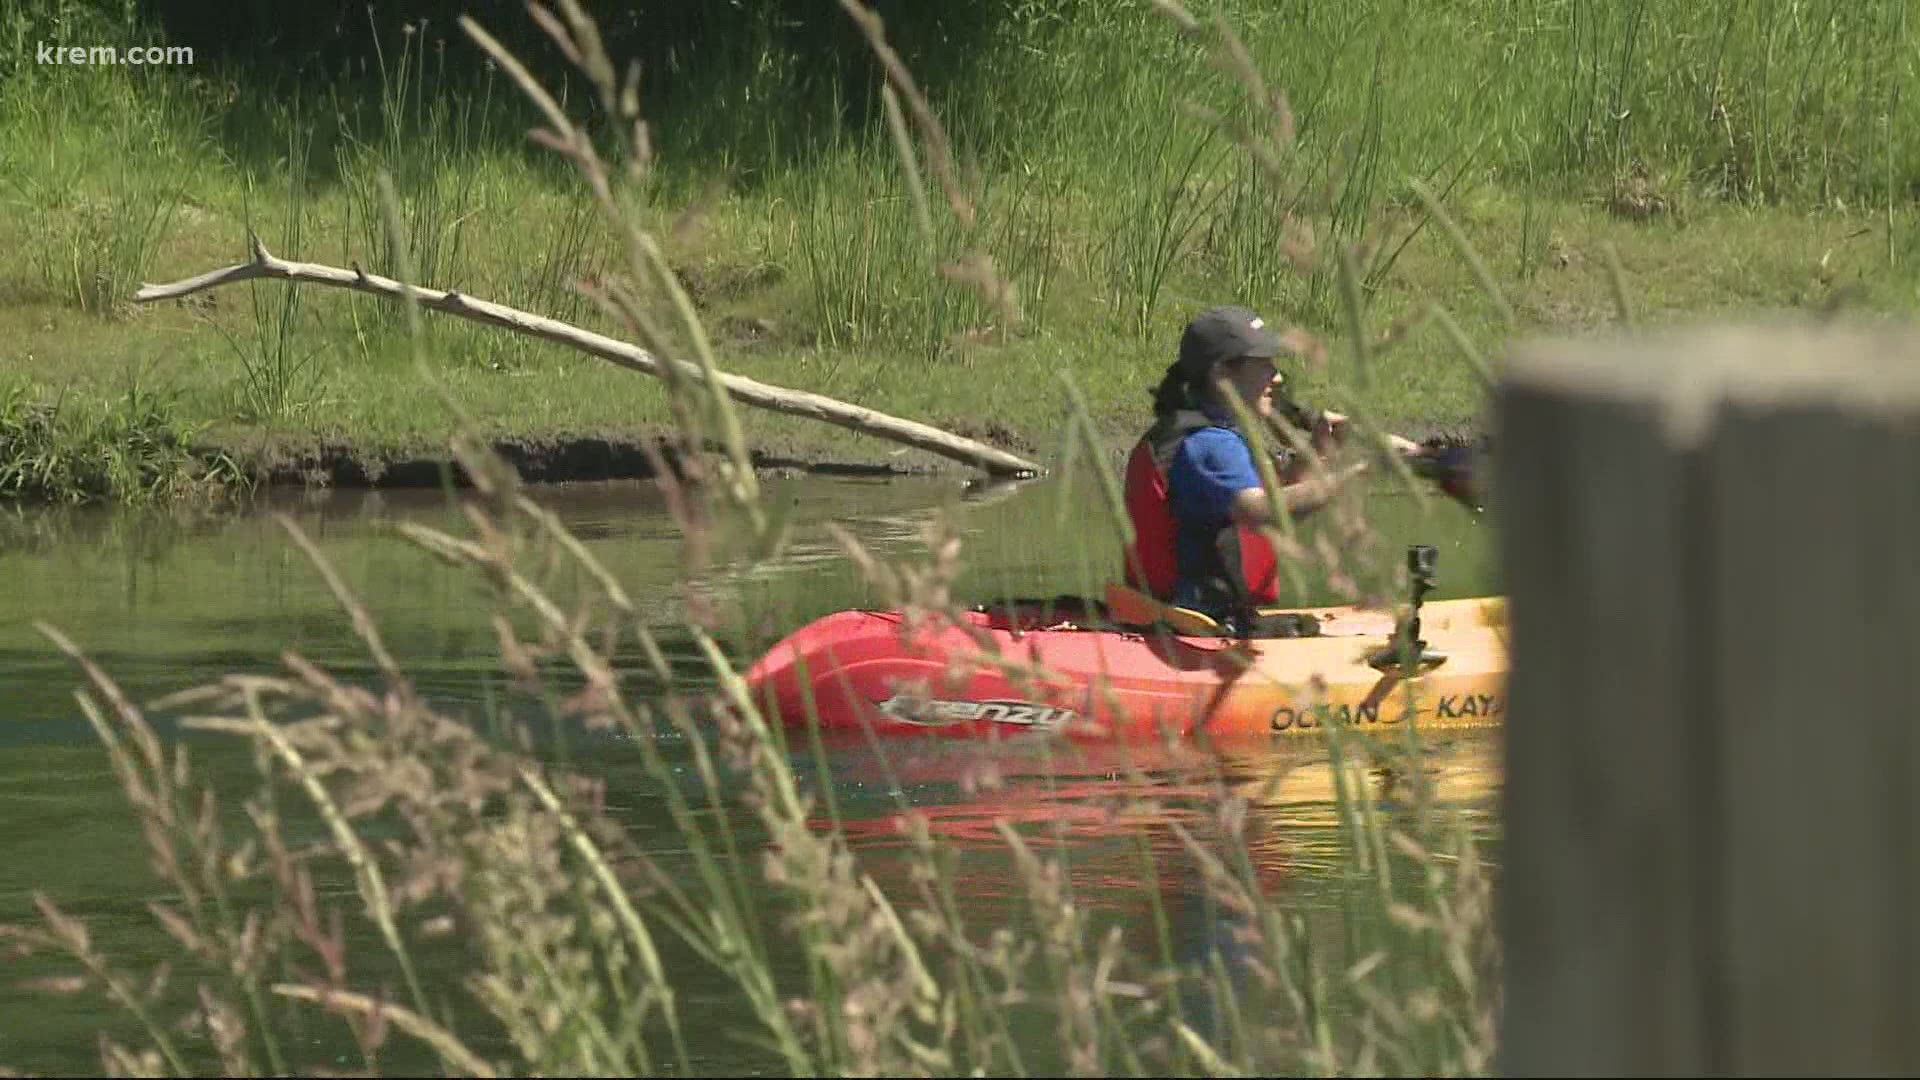 Nicole Hernandez took to the water to show kayak safety at the new put in location on the Little Spokane River